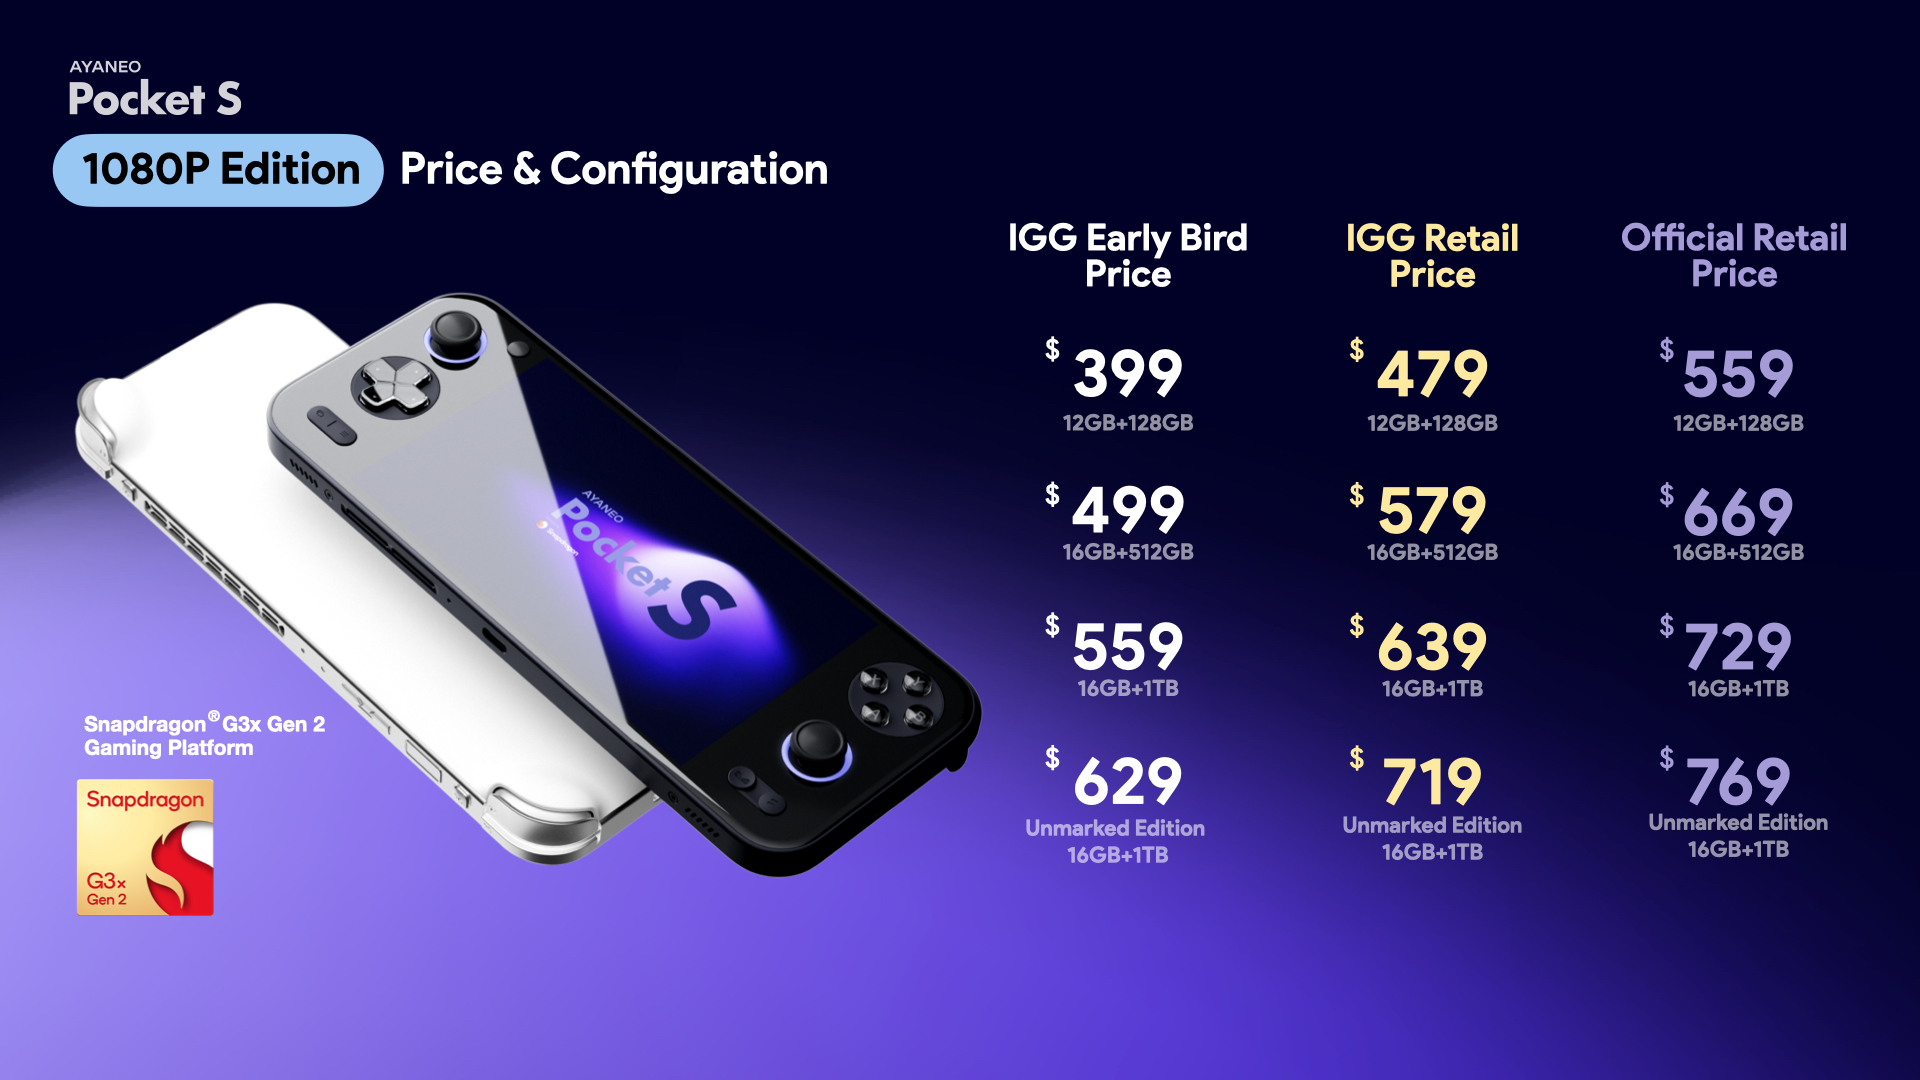 Ayaneo Pocket S 1080P Edition pricing chart